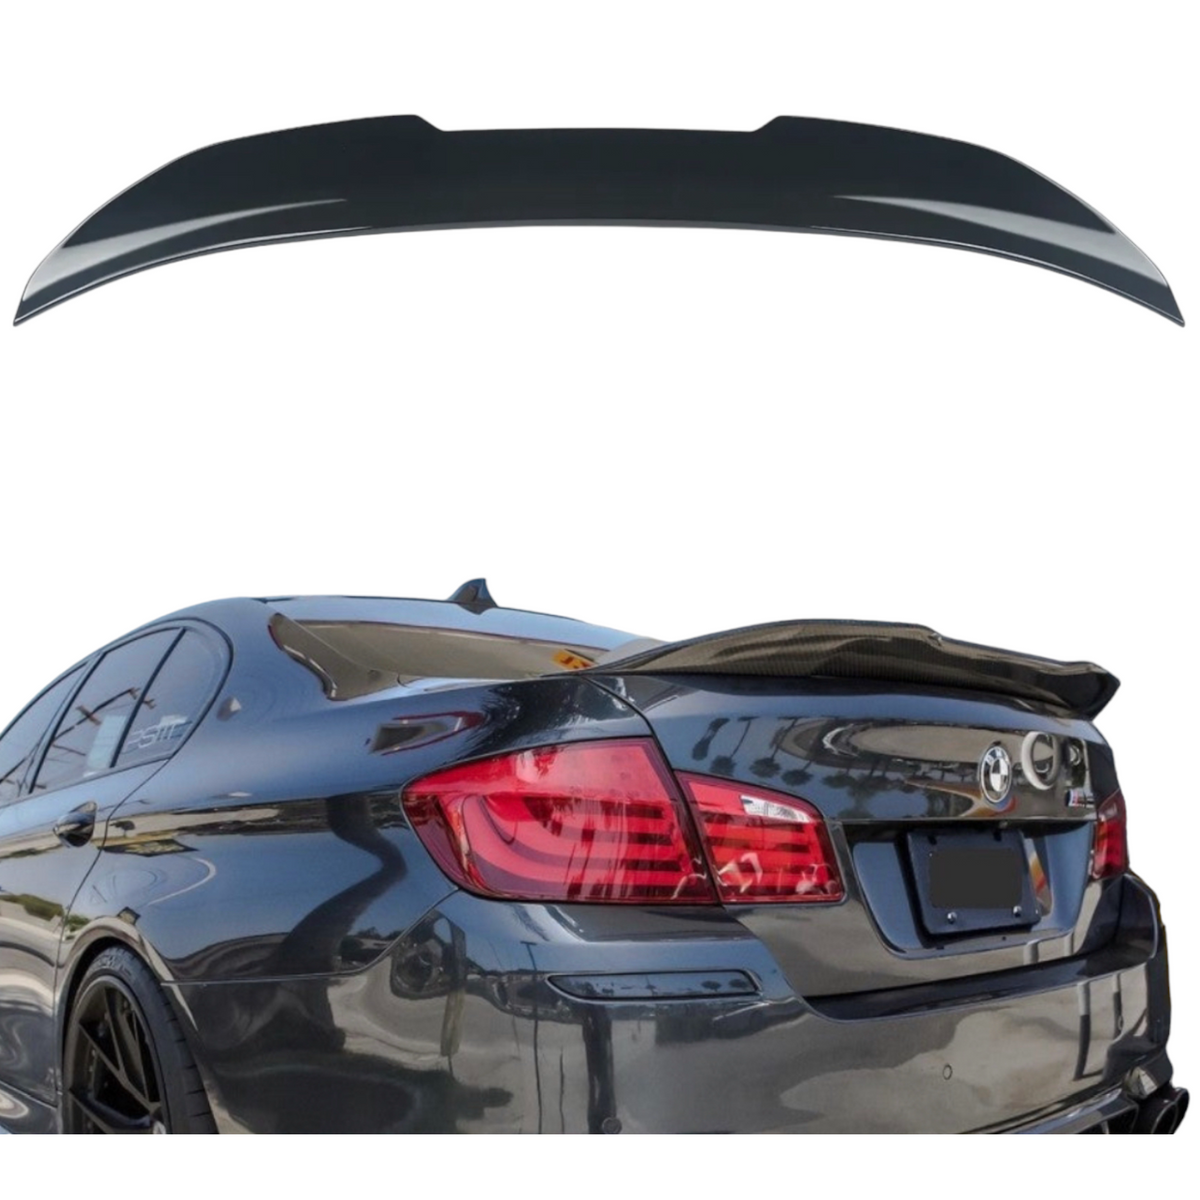 Boot Spoiler - Kick Wing - Fits BMW F10 5 Series M5 - Carbon Look